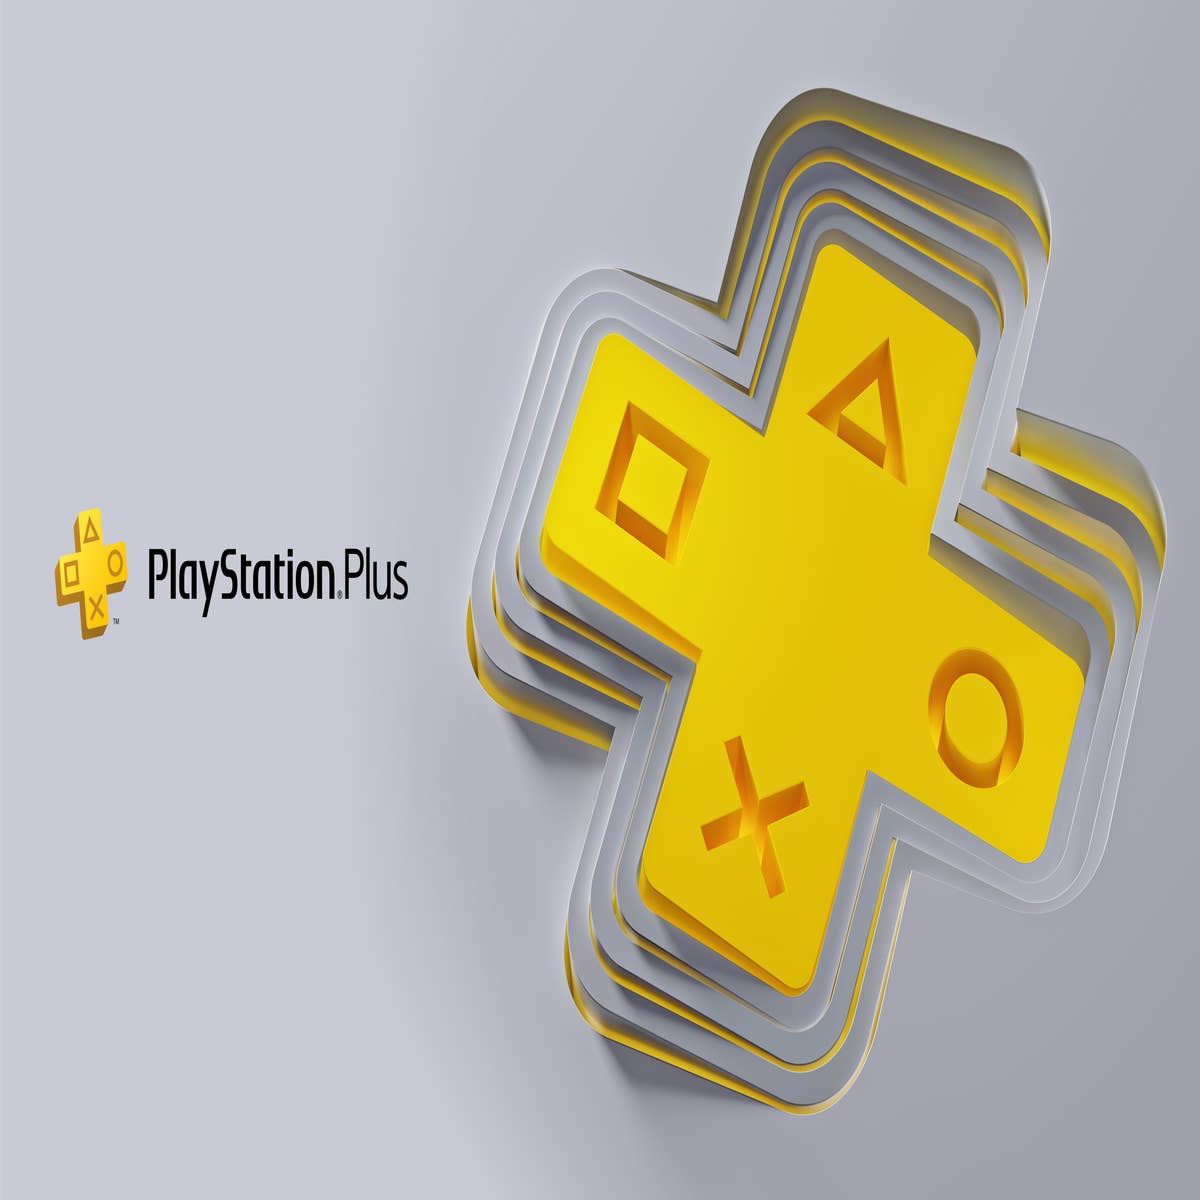 PlayStation Plus Actually Has Fewer Games Than PS Now